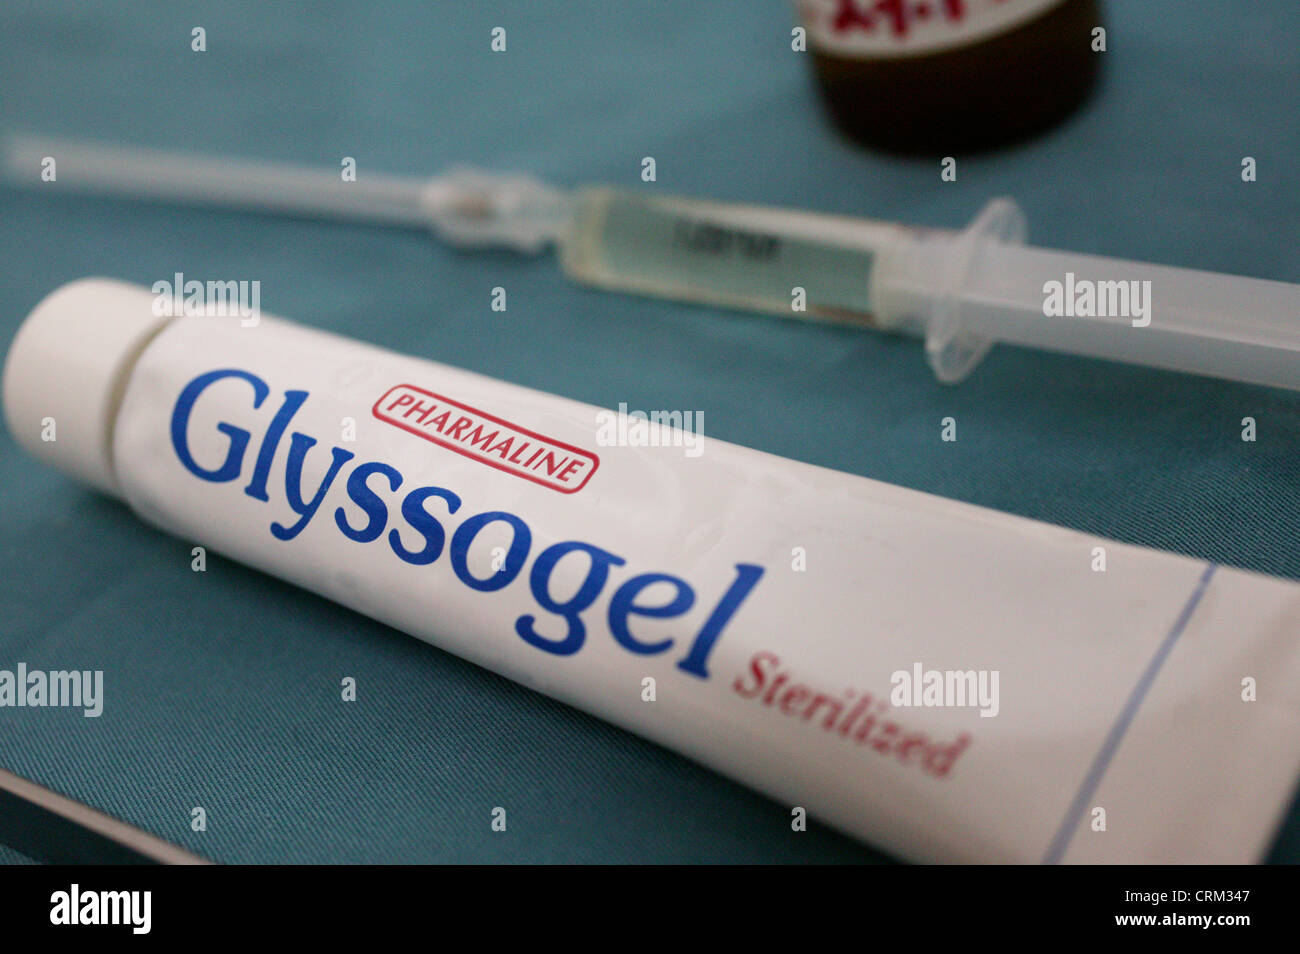 Xylocaine gel. Xylocaine (lidocaine) is used as a local anaesthetic to block nerves Stock Photo